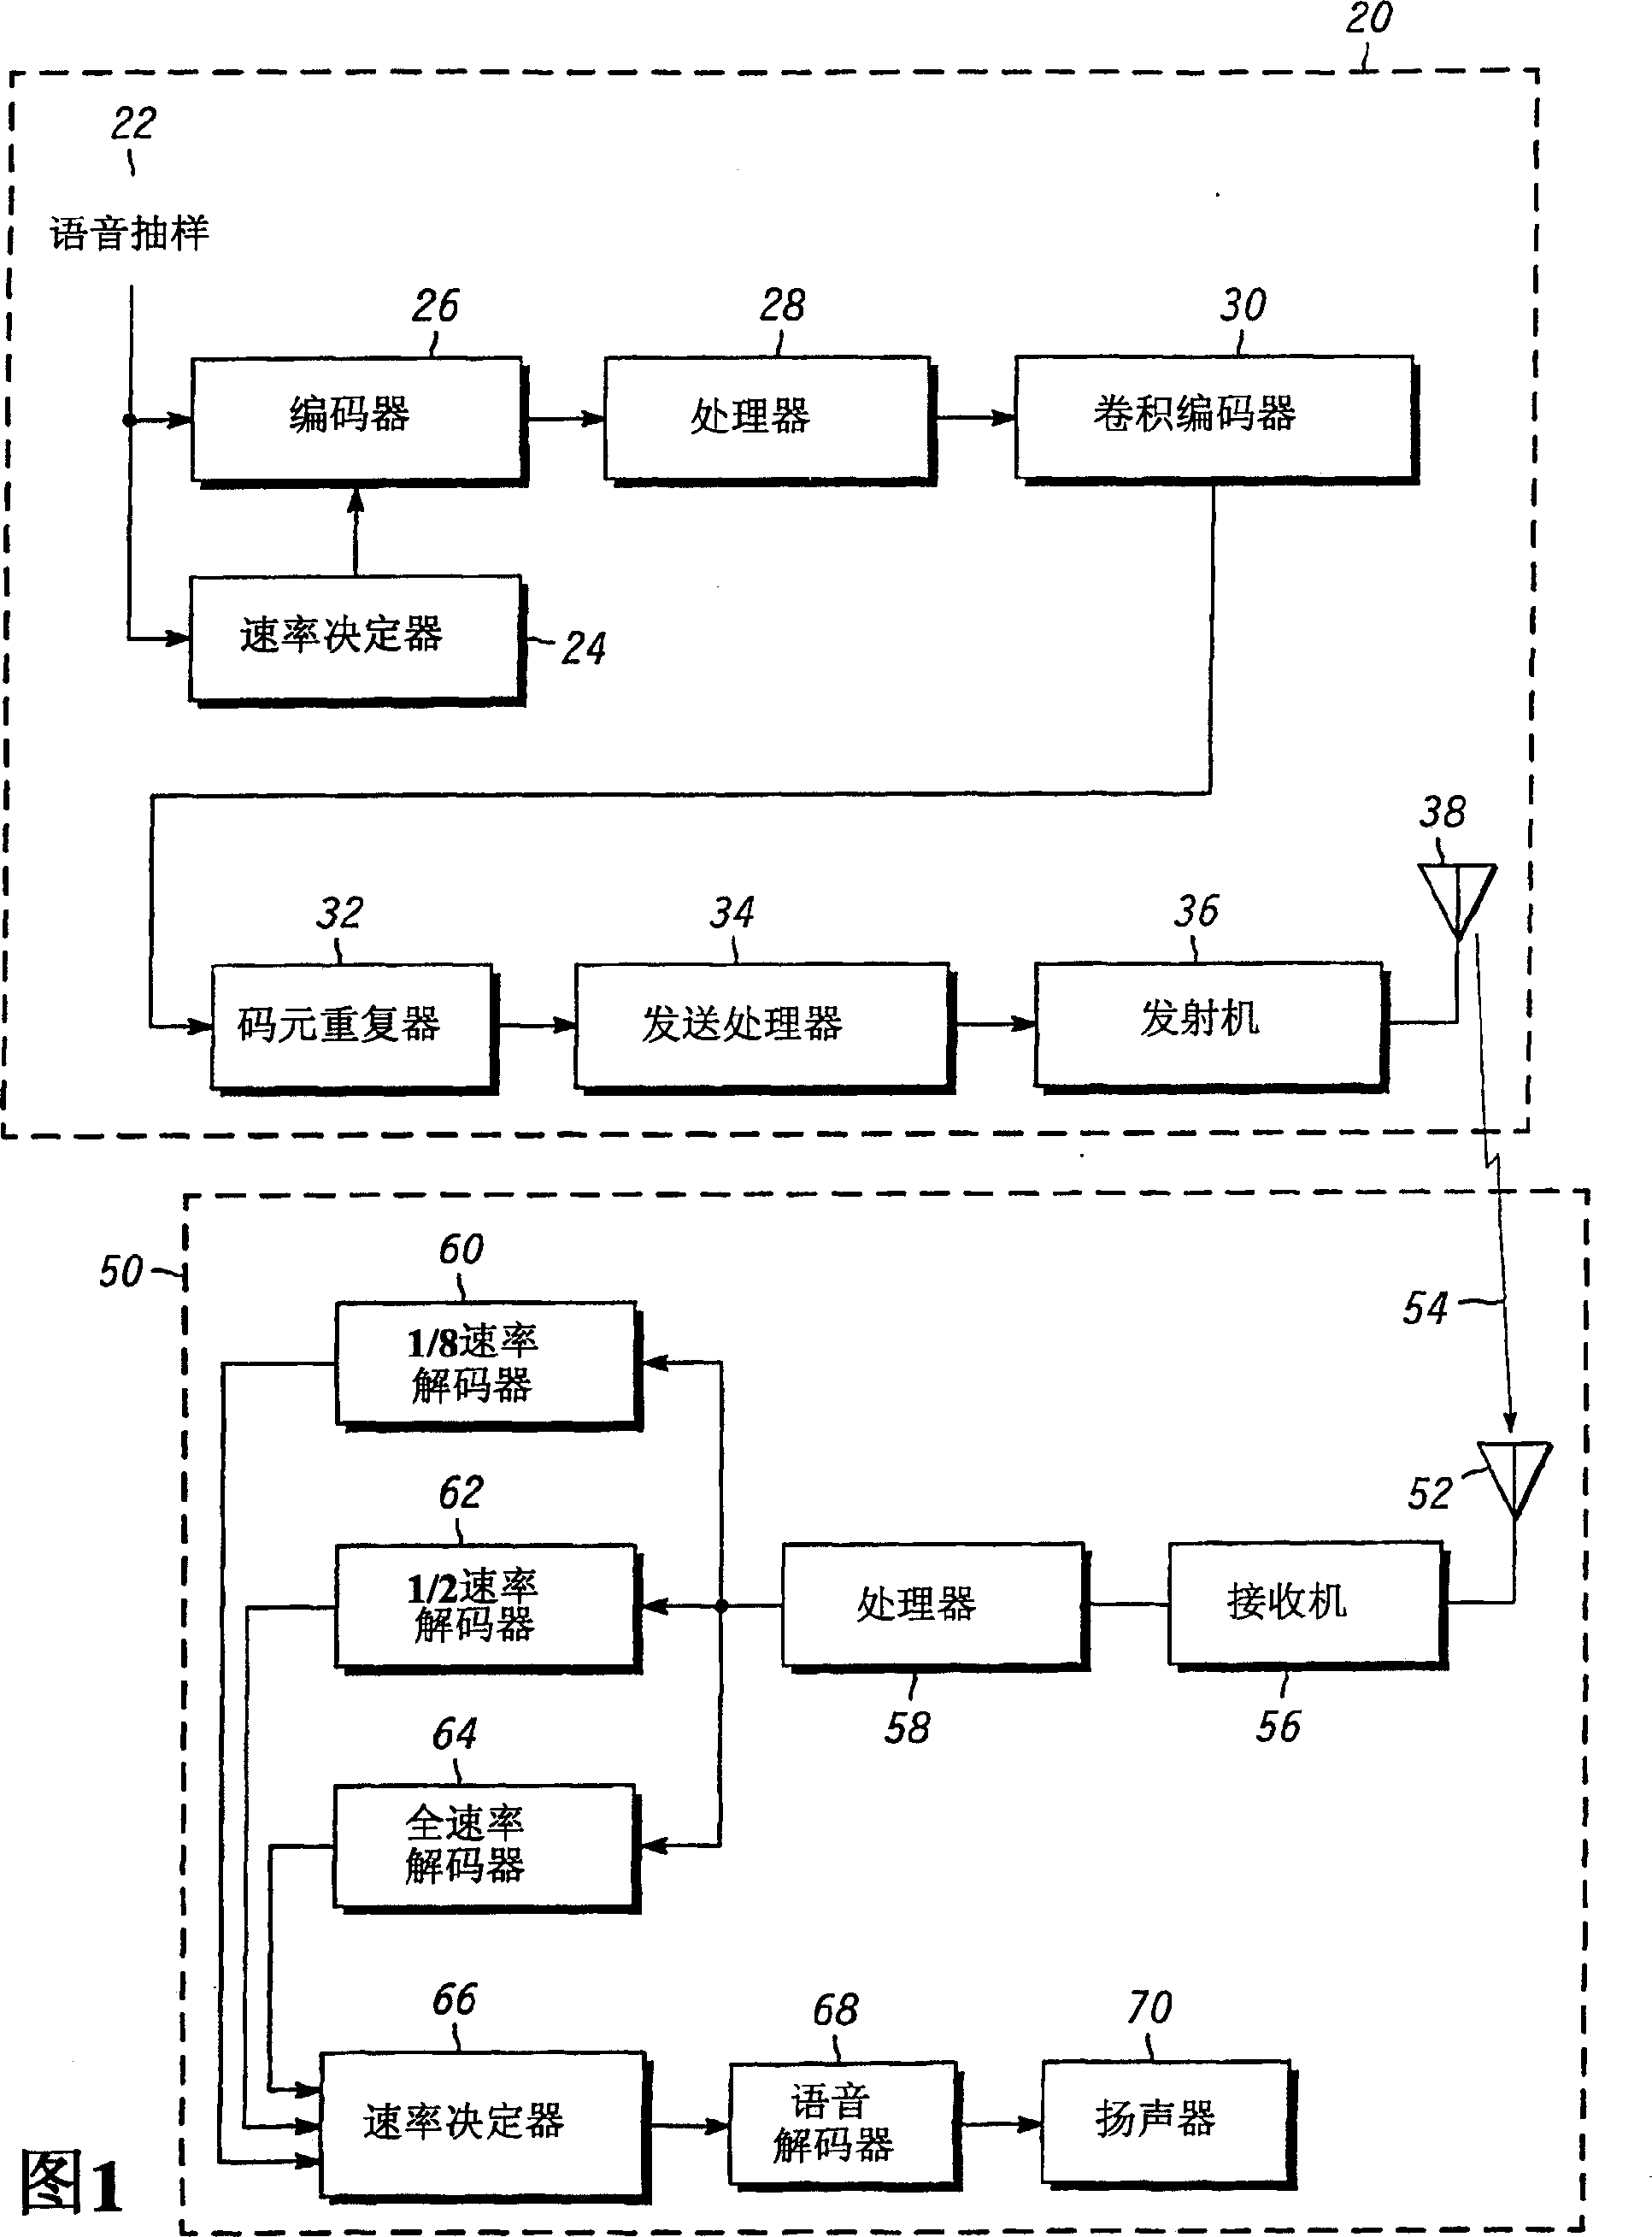 Method and system for encoding to mitigate decoding errors in a receiver